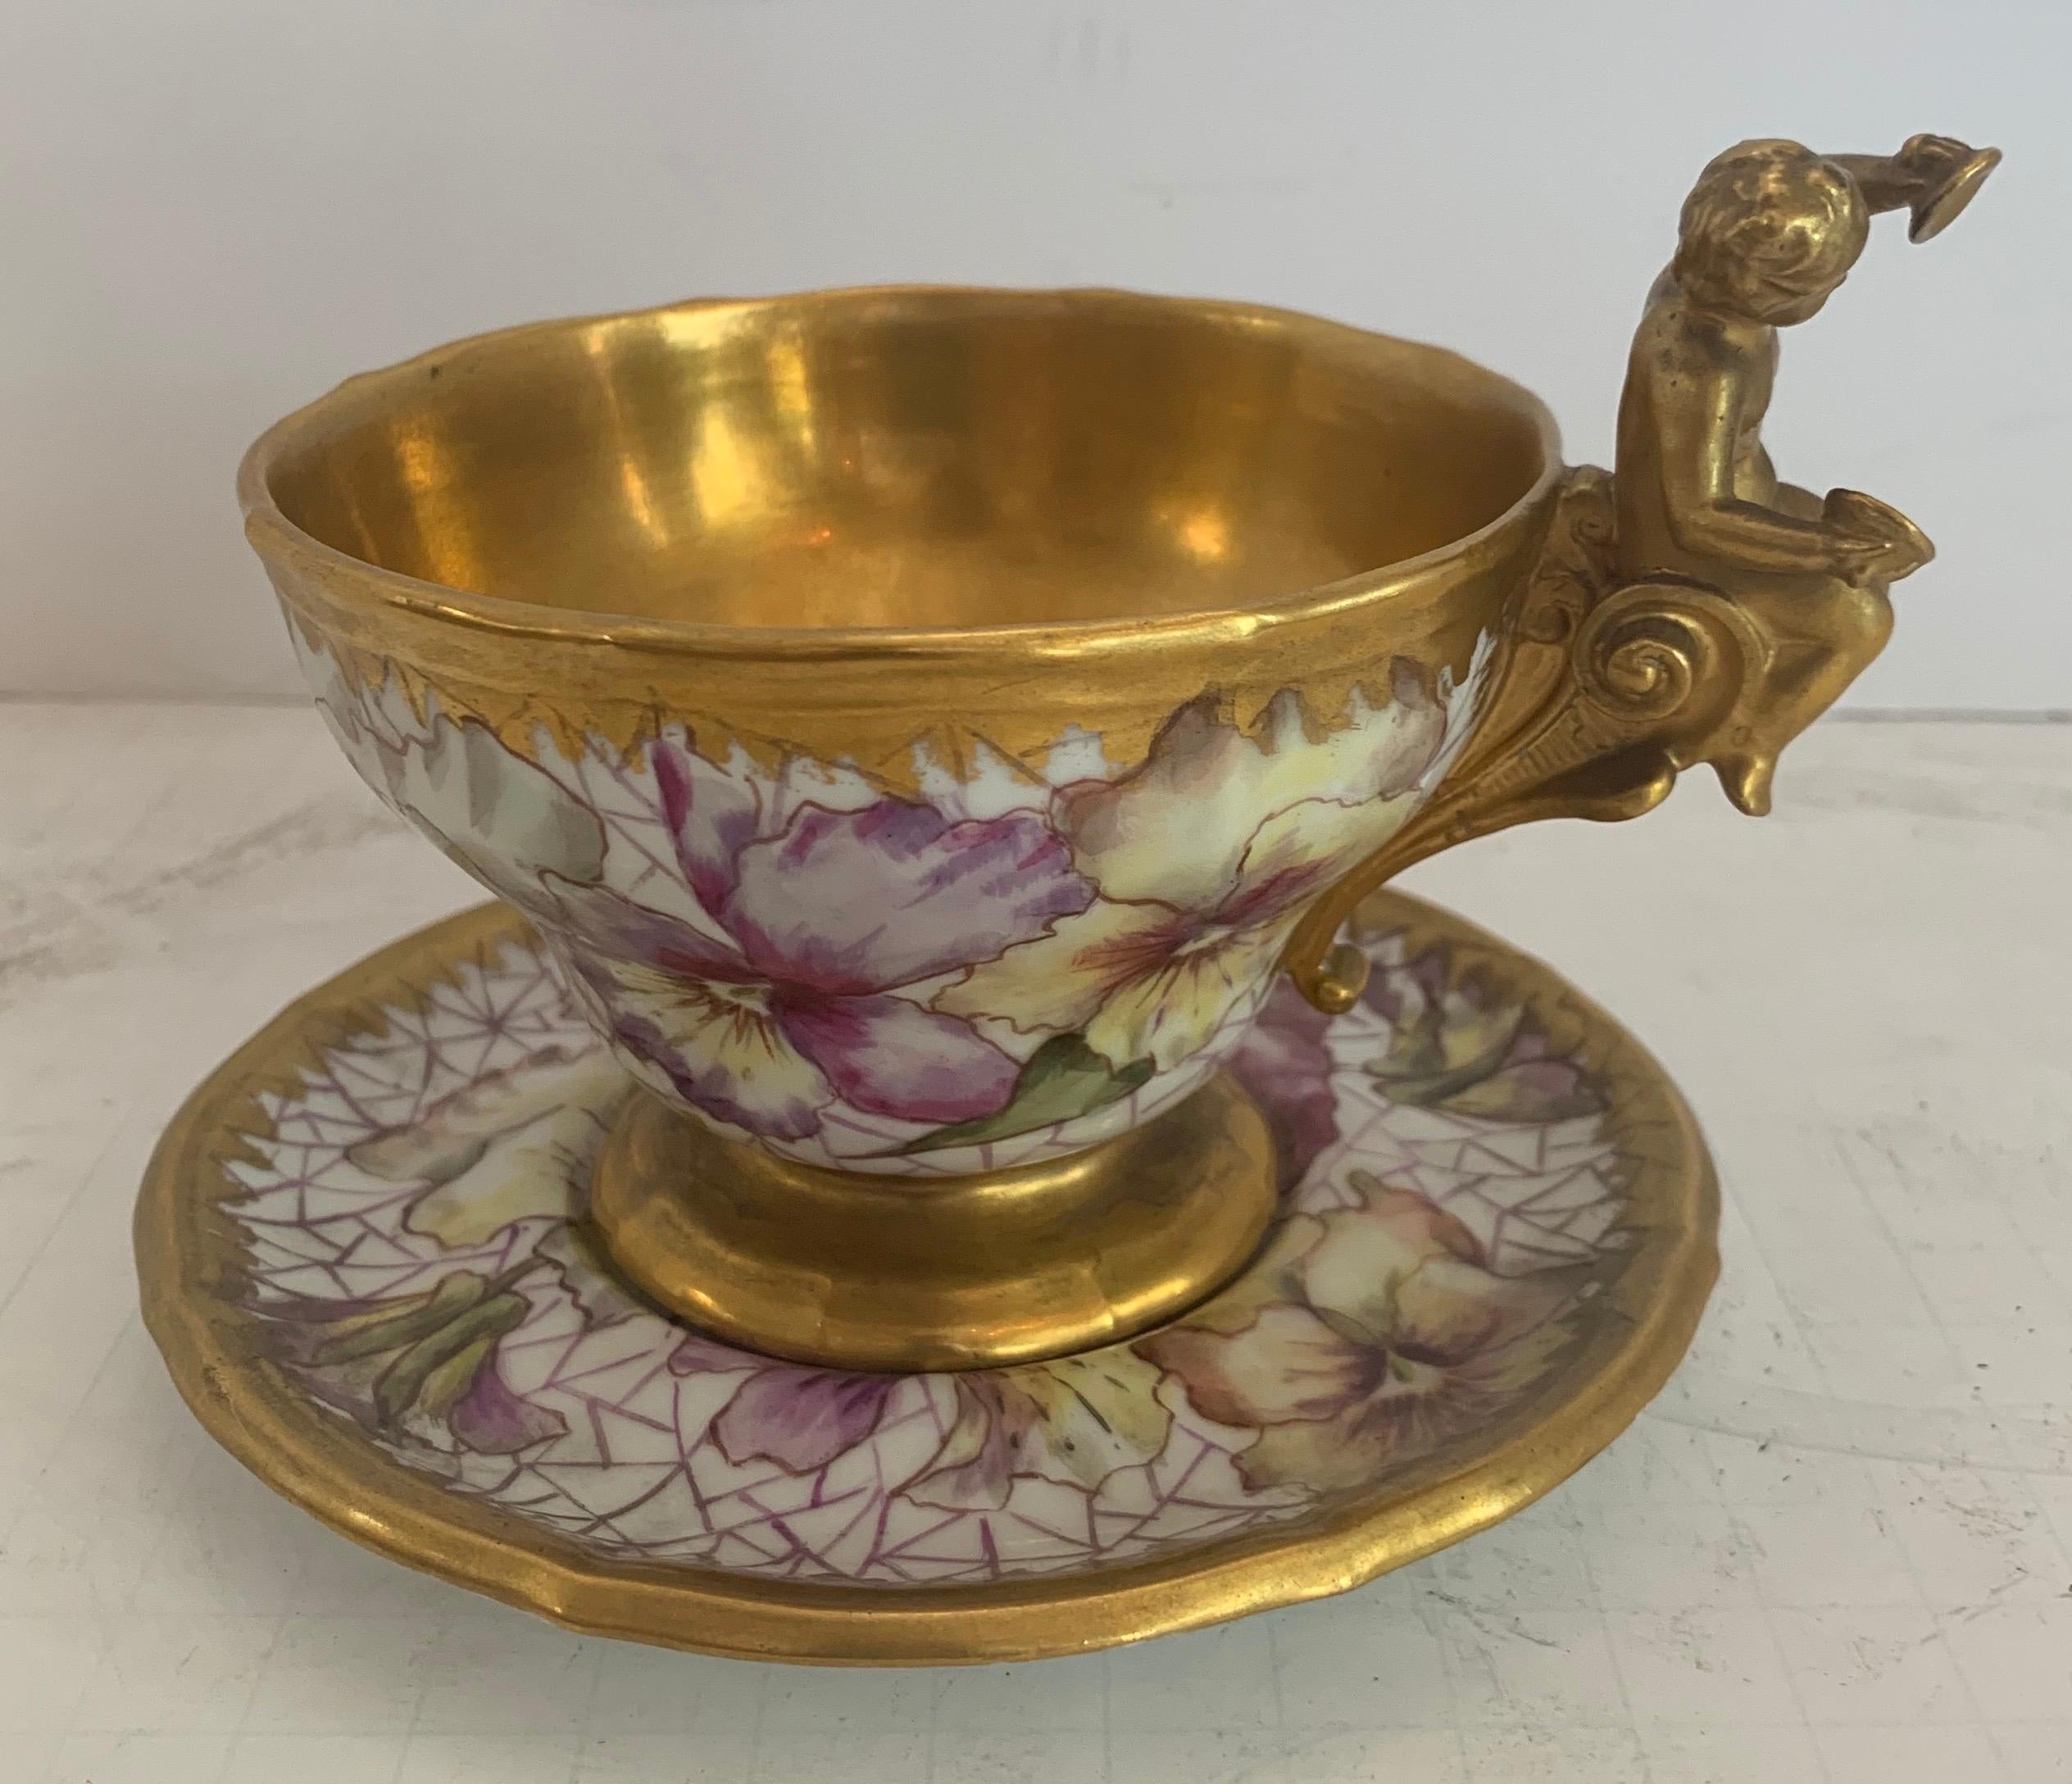 A wonderful KPM hand painted porcelain German cup and saucer set with cherub / putti and flower gold gilt decoration.